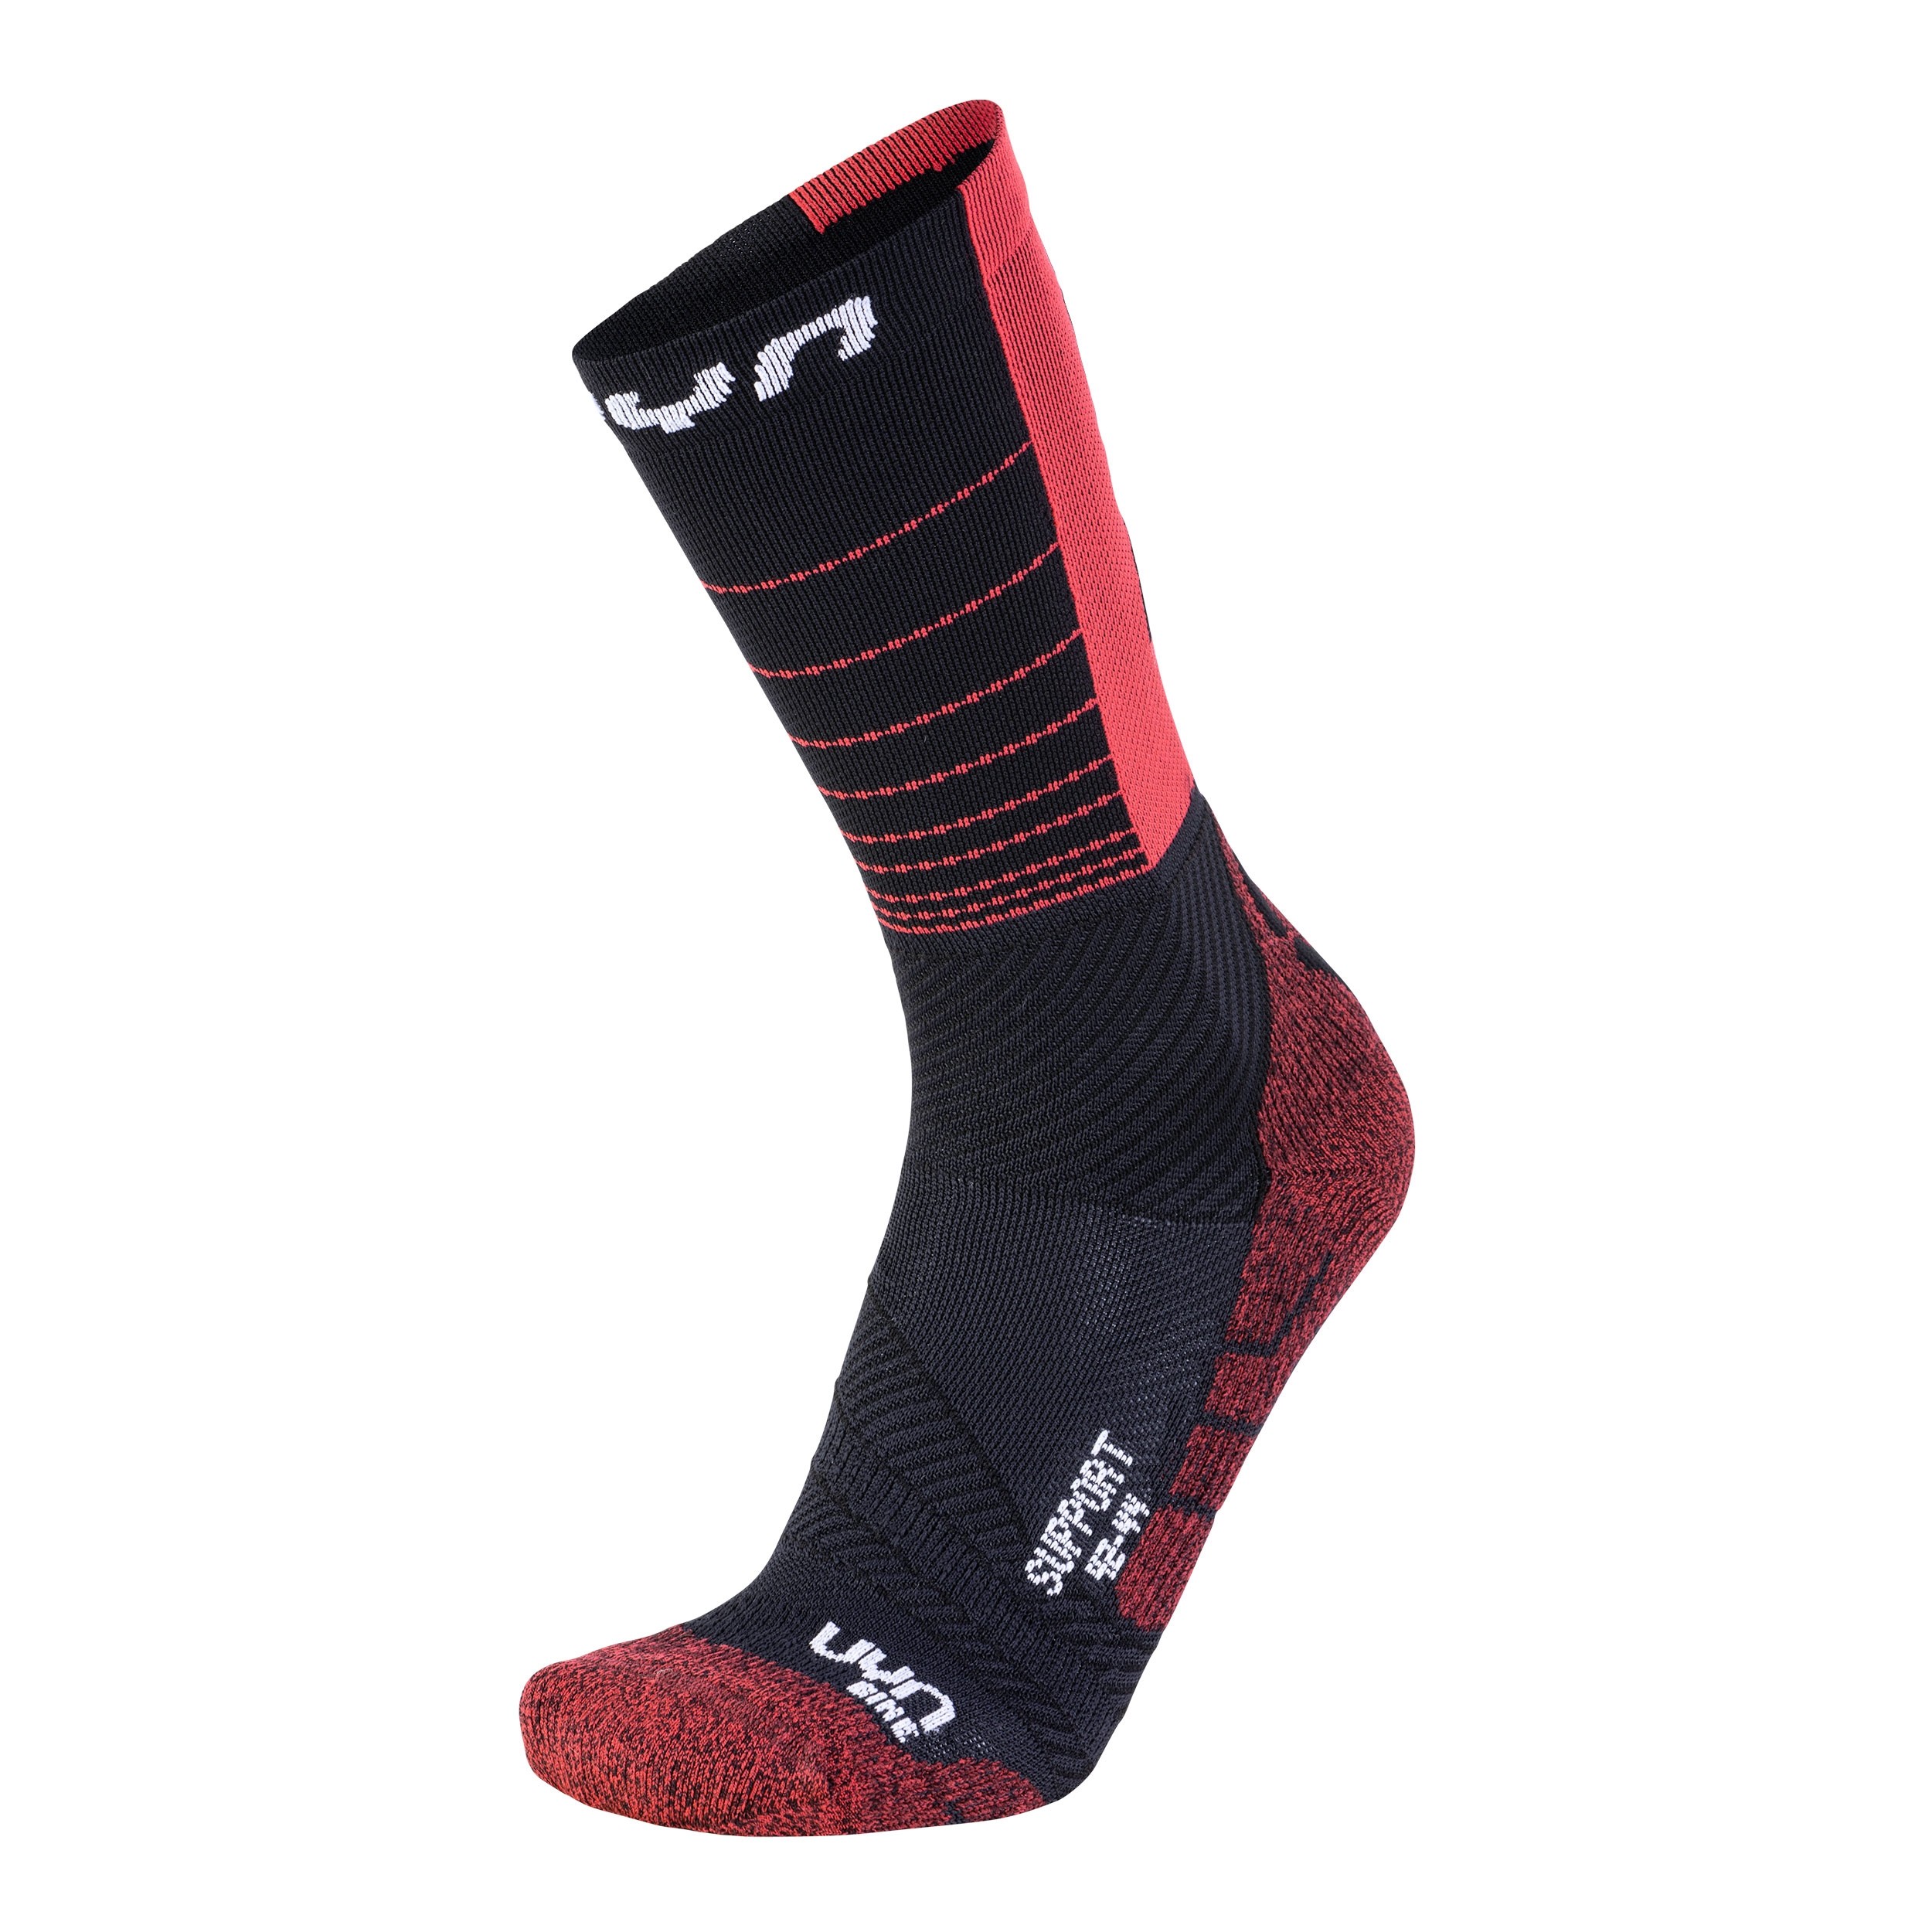 Uyn cycling support chaussettes de cyclisme noir hibiscus rouge